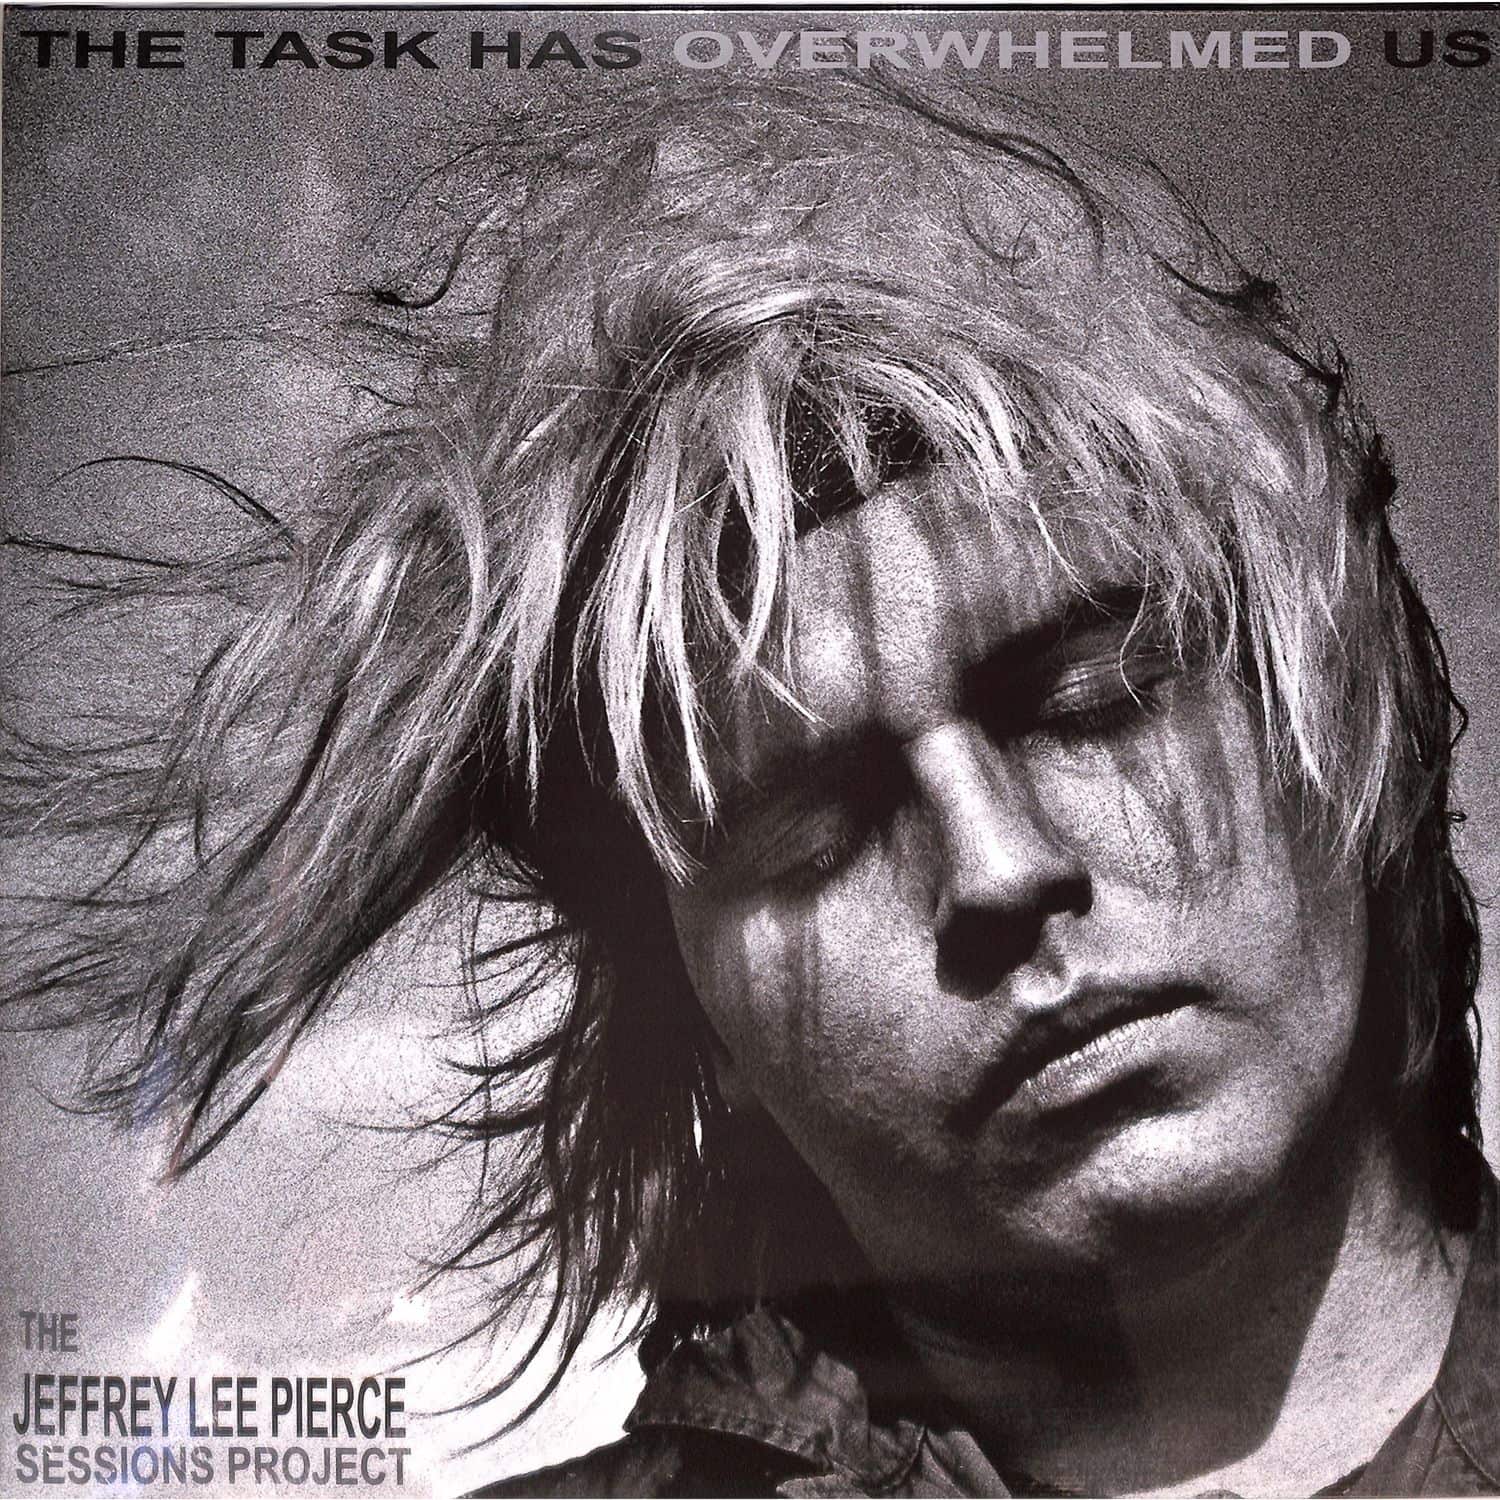 The Jeffrey Lee Pierce Sessions Project - THE TASK HAS OVERWHELMED US 